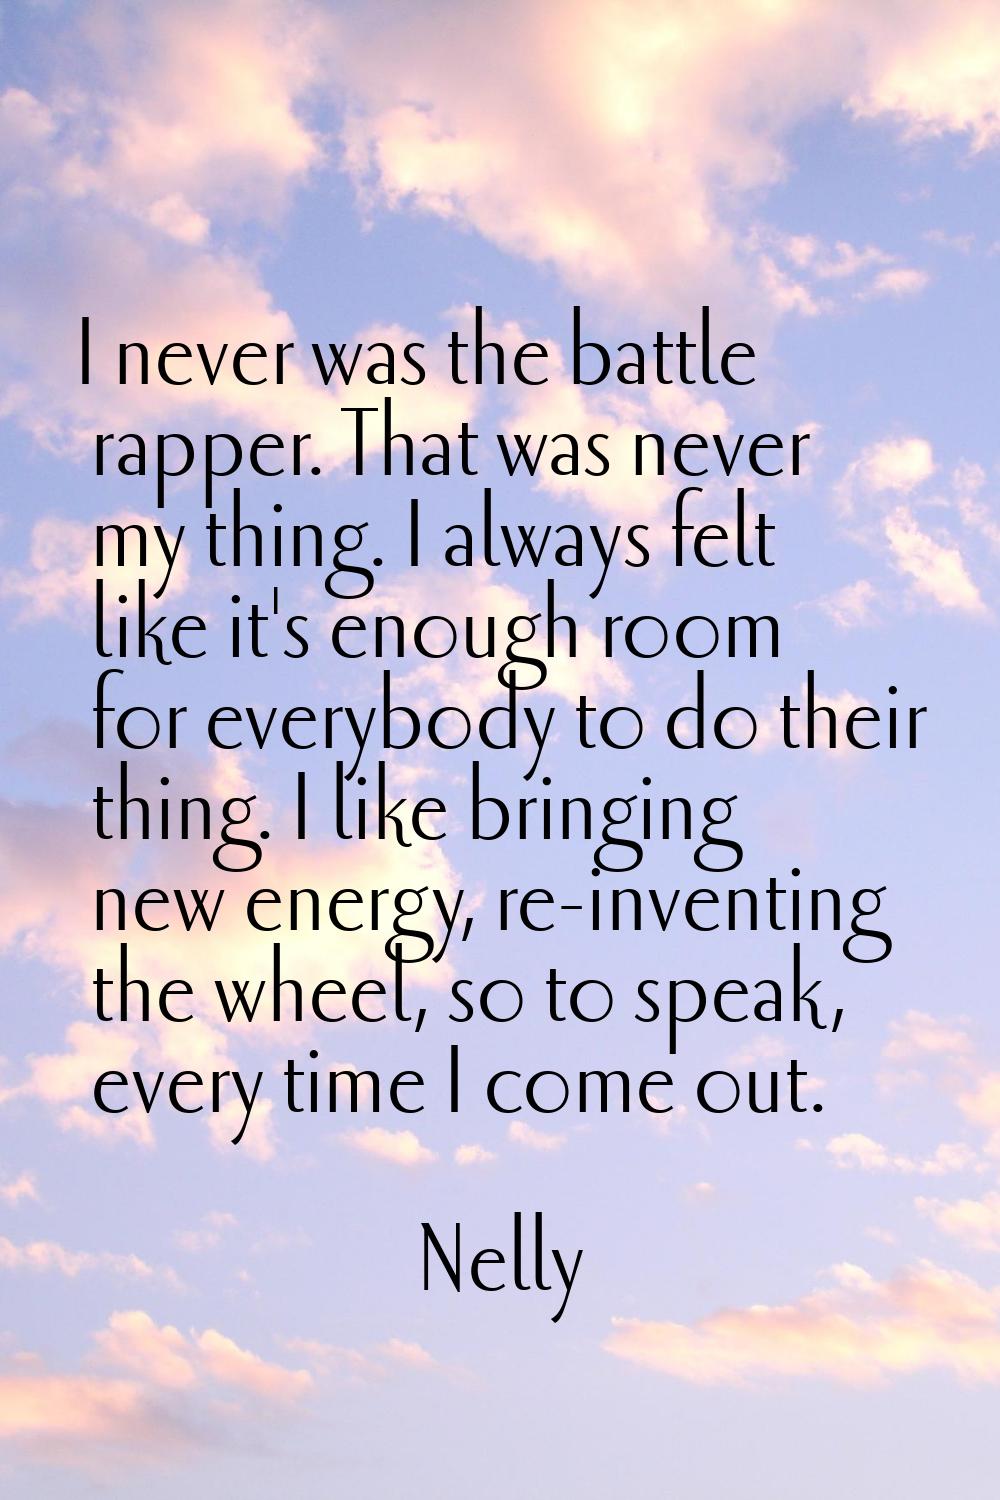 I never was the battle rapper. That was never my thing. I always felt like it's enough room for eve